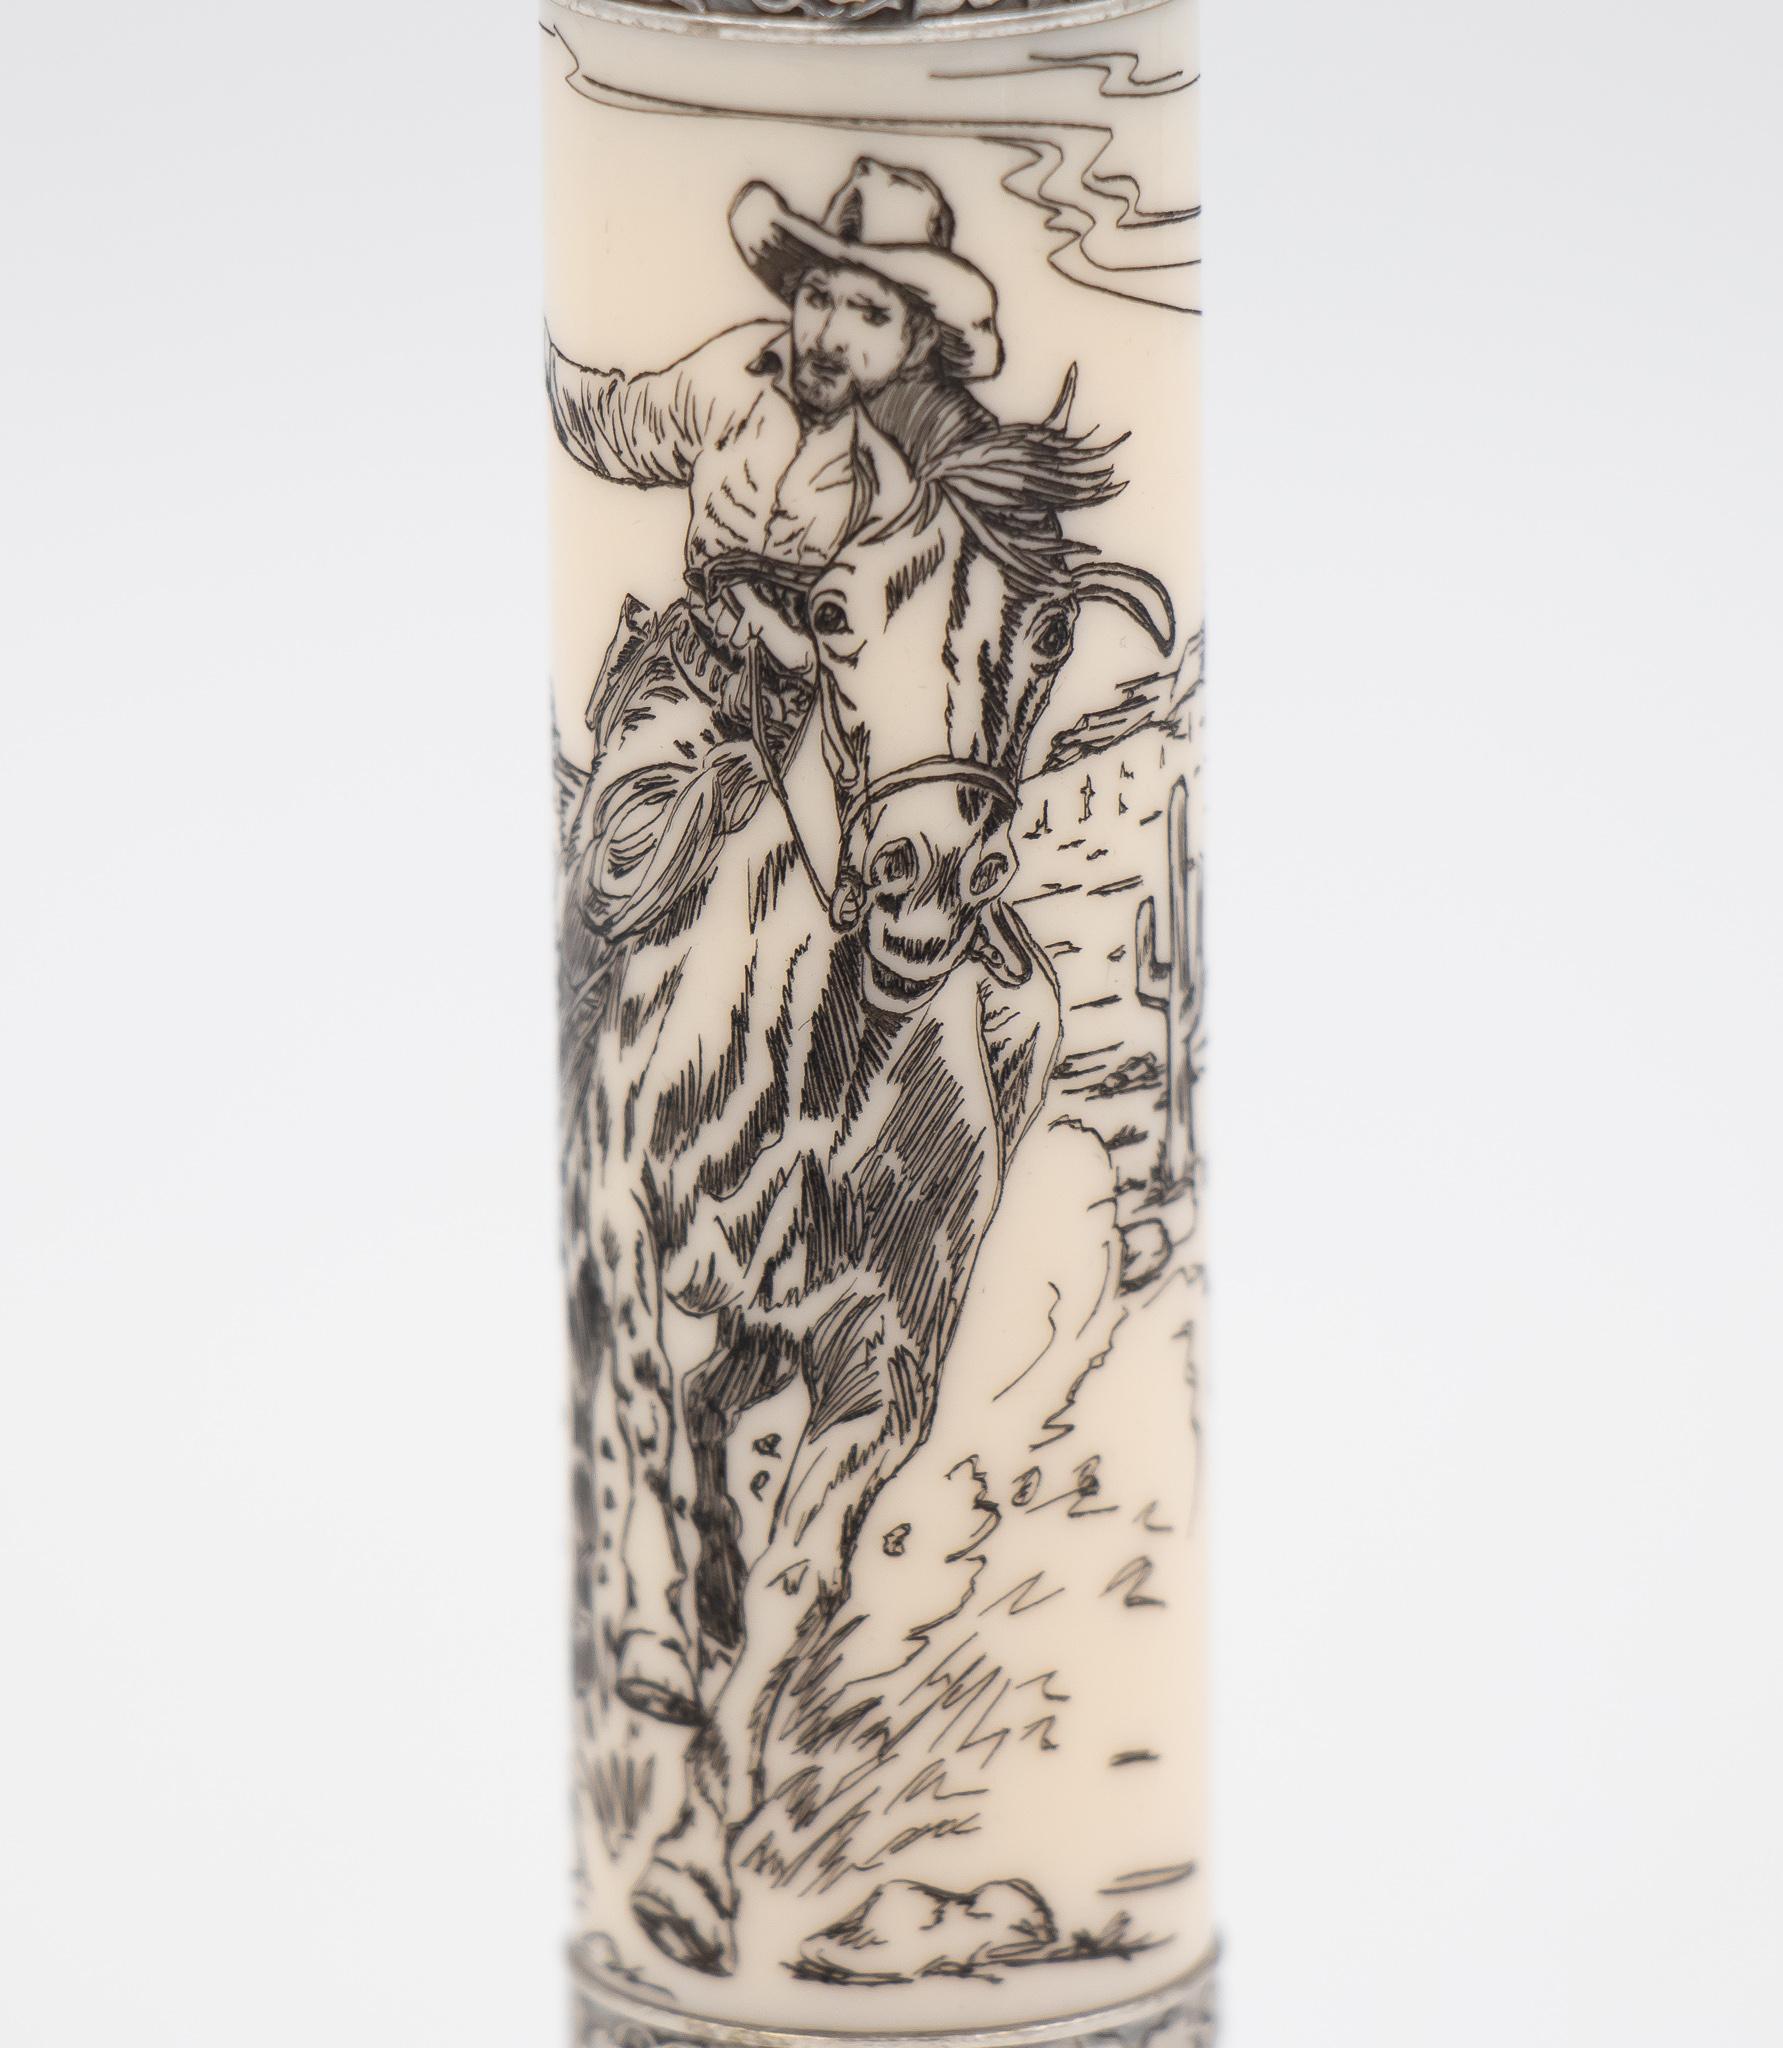 The Wild West writing instrument is crafted from a combination of leather & sterling silver 925. The barrel features an illustration in scrimshaw depicting a cowboy riding a horse. It's packaged in an America walnut wood box which not only encases